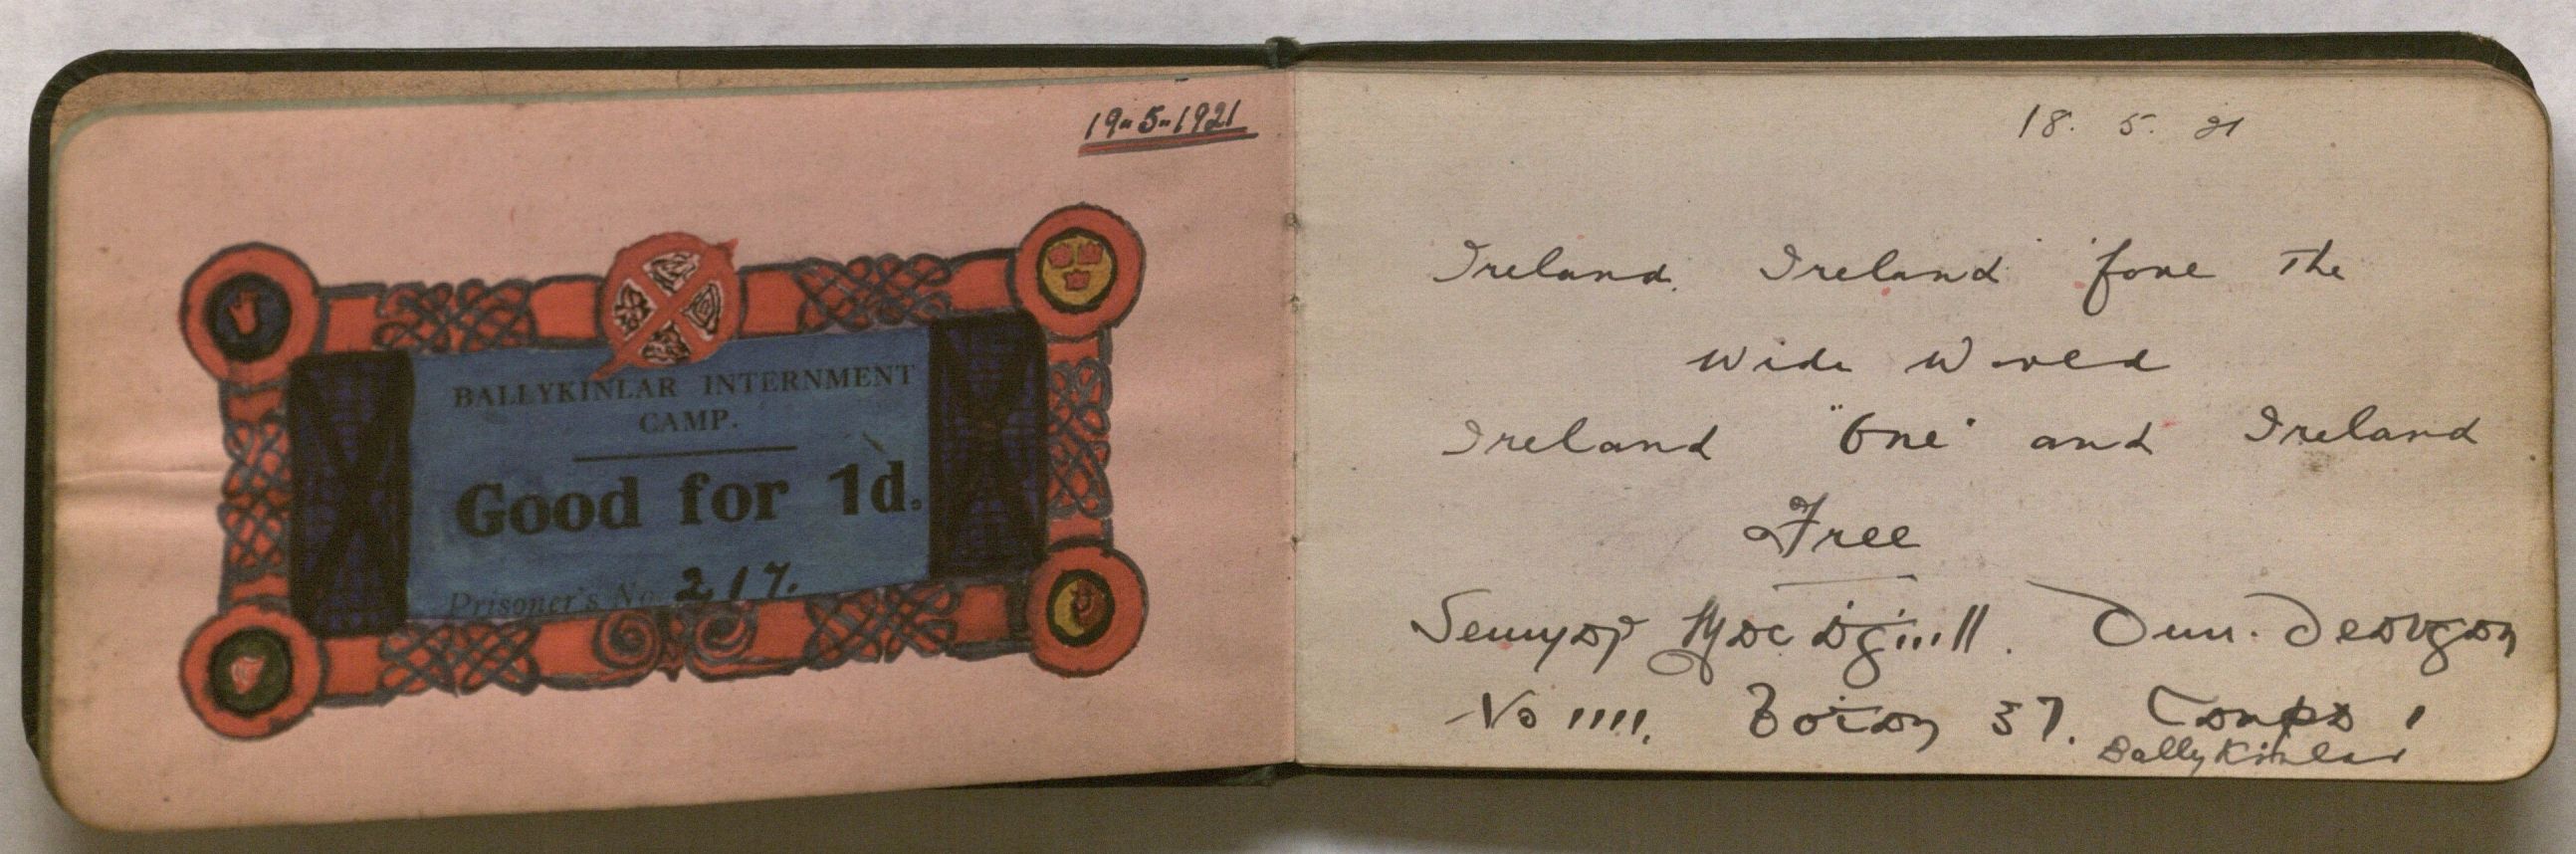 Image of the Autograph Book open to an embellished credit ticket and an inscription bearing a patriotic sentiment.